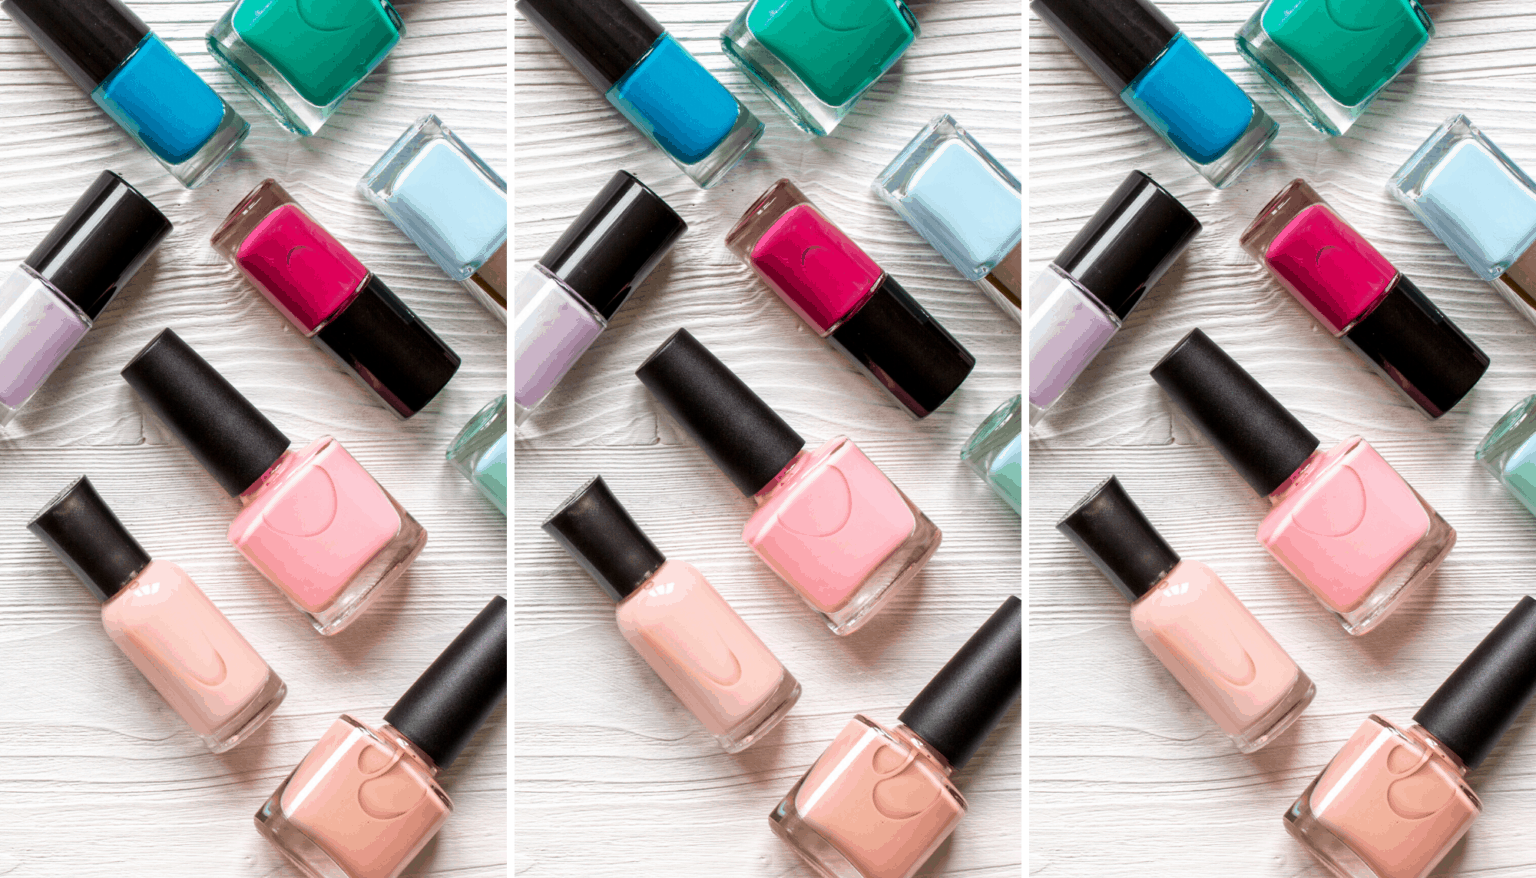 3. "Must-have nail polish shades for 2024" - wide 7